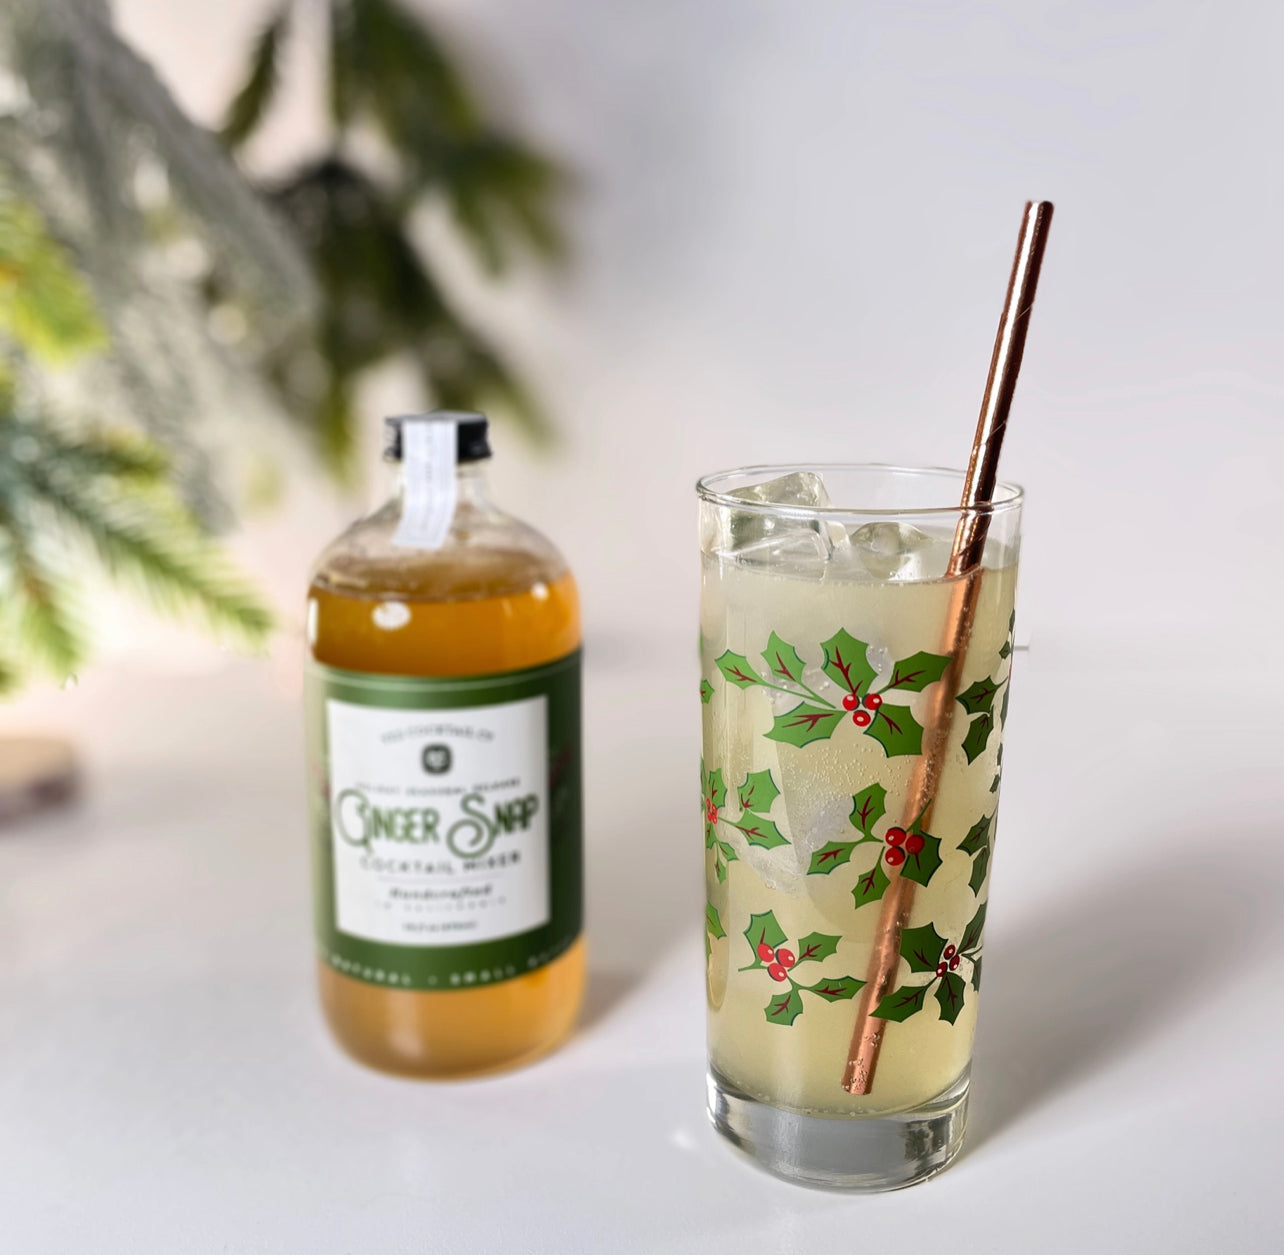 16 oz bottle of handcrafted Ginger Snap Cocktail Mixer made by Yes Cocktail Co displayed with a finished cocktail in a holiday decorated glass with stainless steel straw